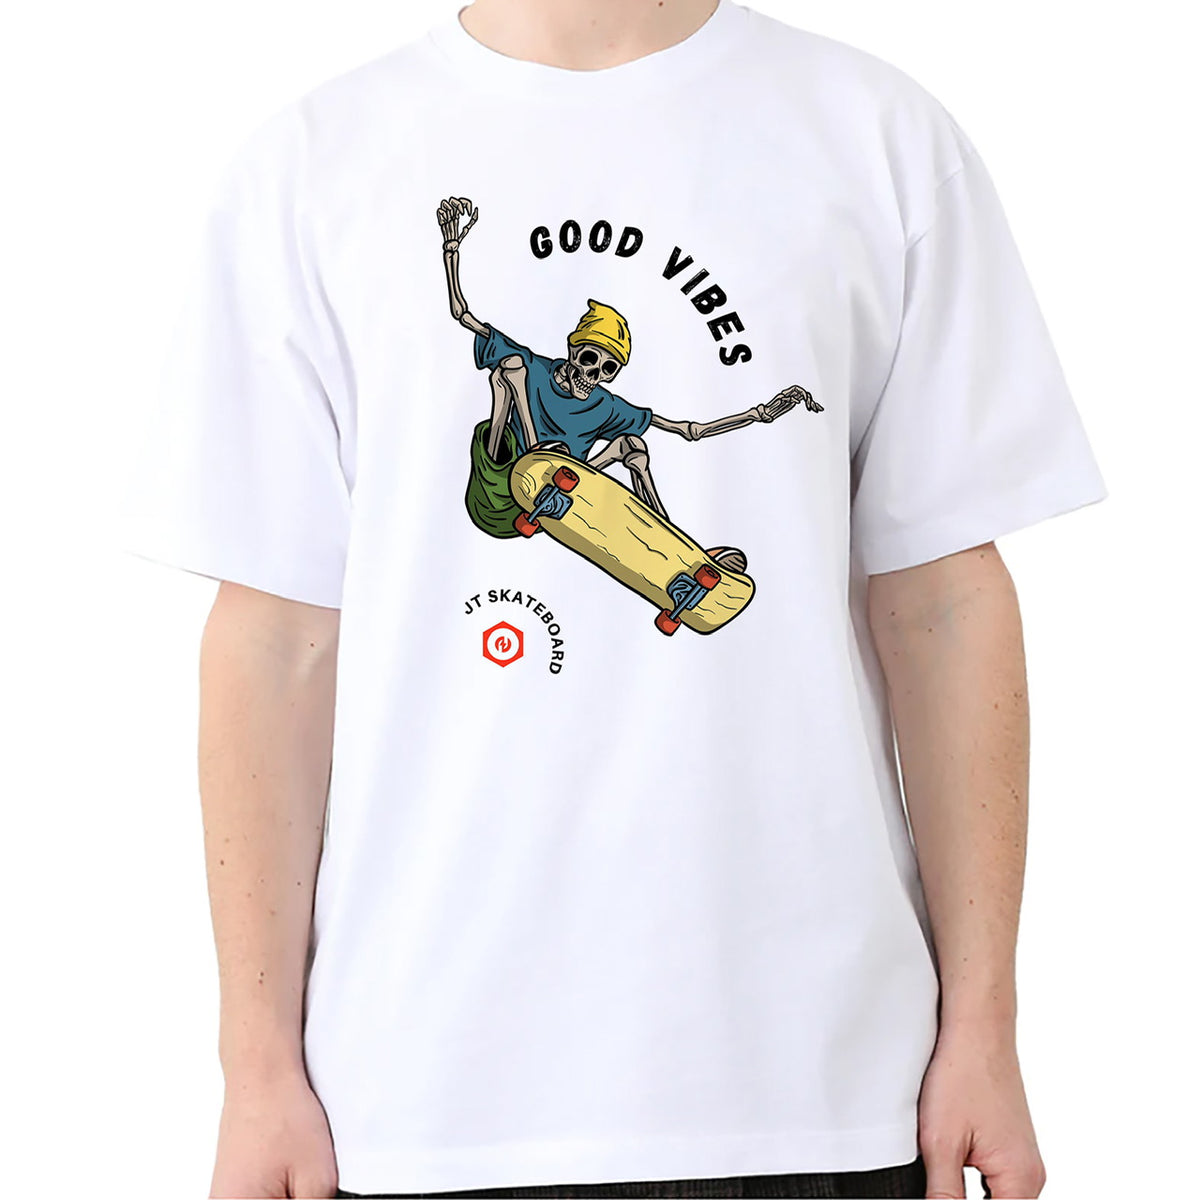 Good Vibes | Relaxed Loose Fitting T-Shirts - JT Skateboard - JT Skateboard